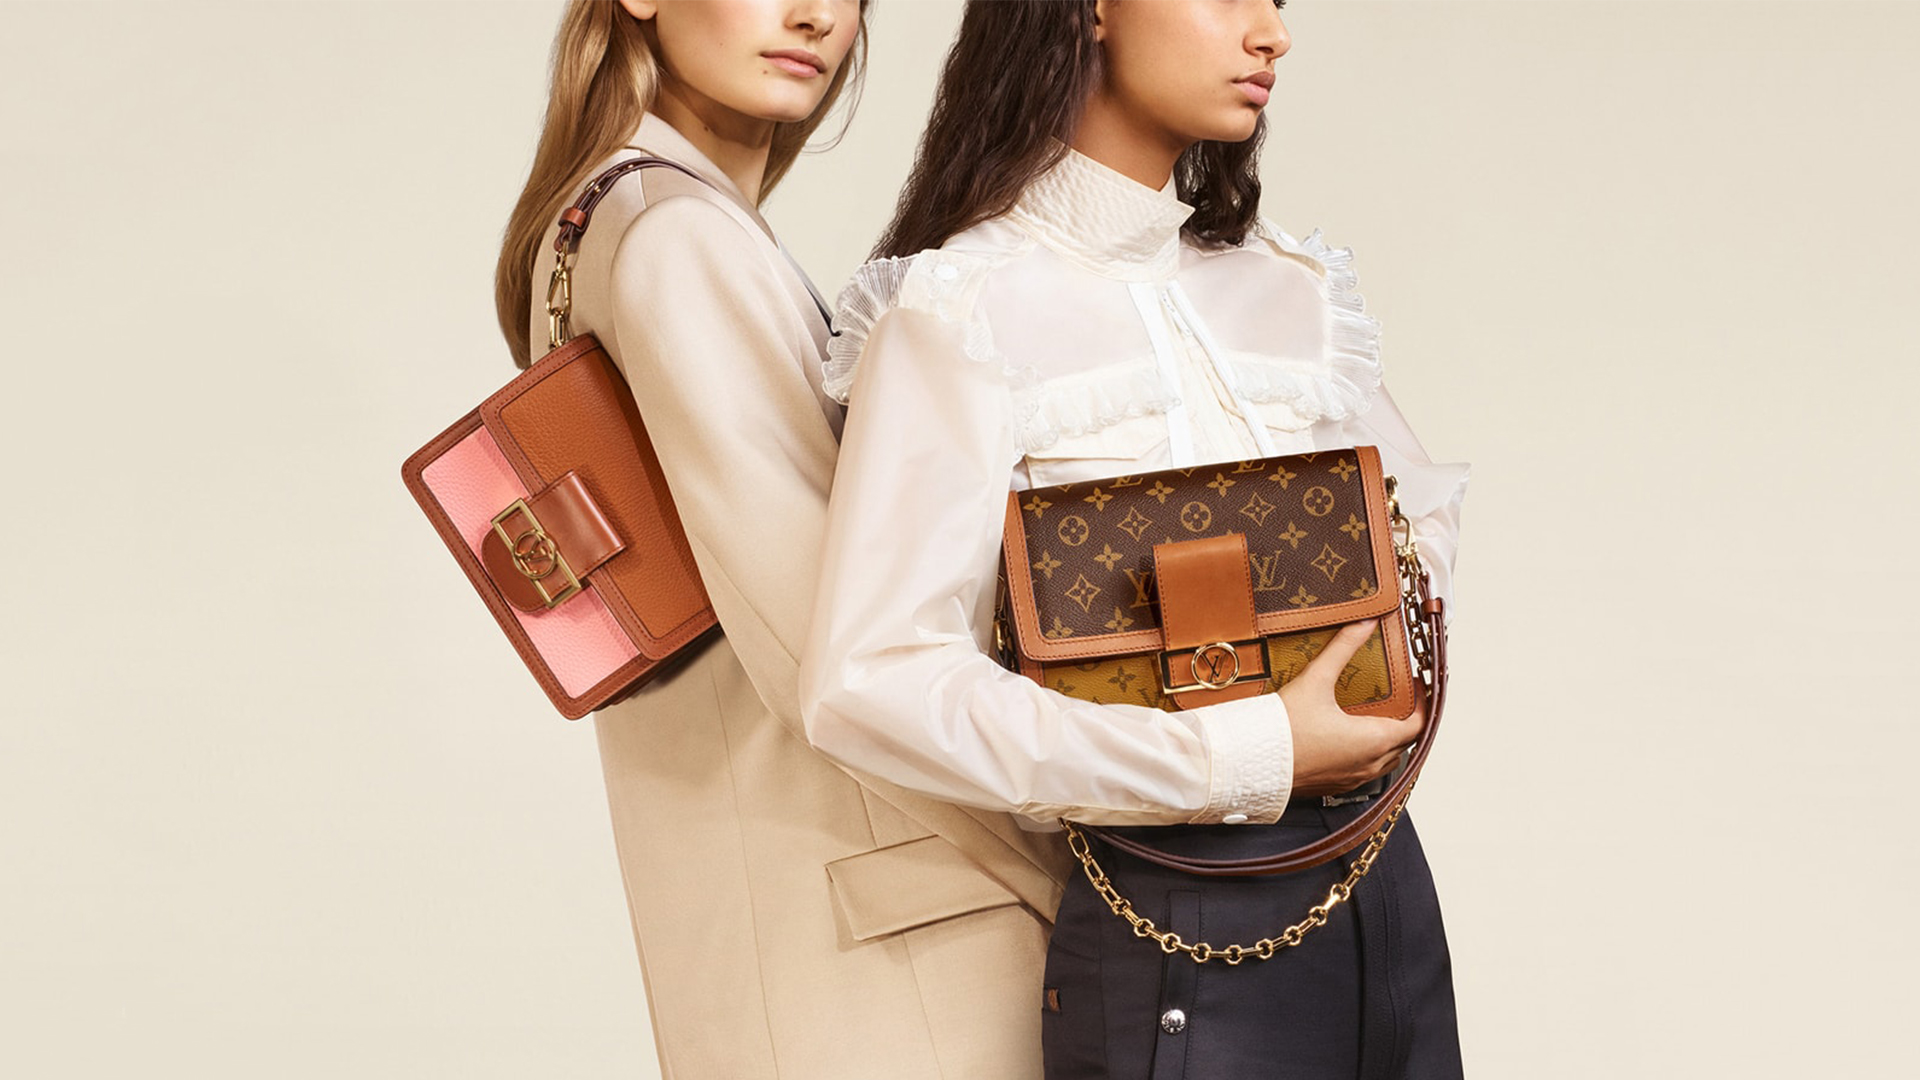 LVMH posts double-digit fall in Q1 revenue; hopes for gradual